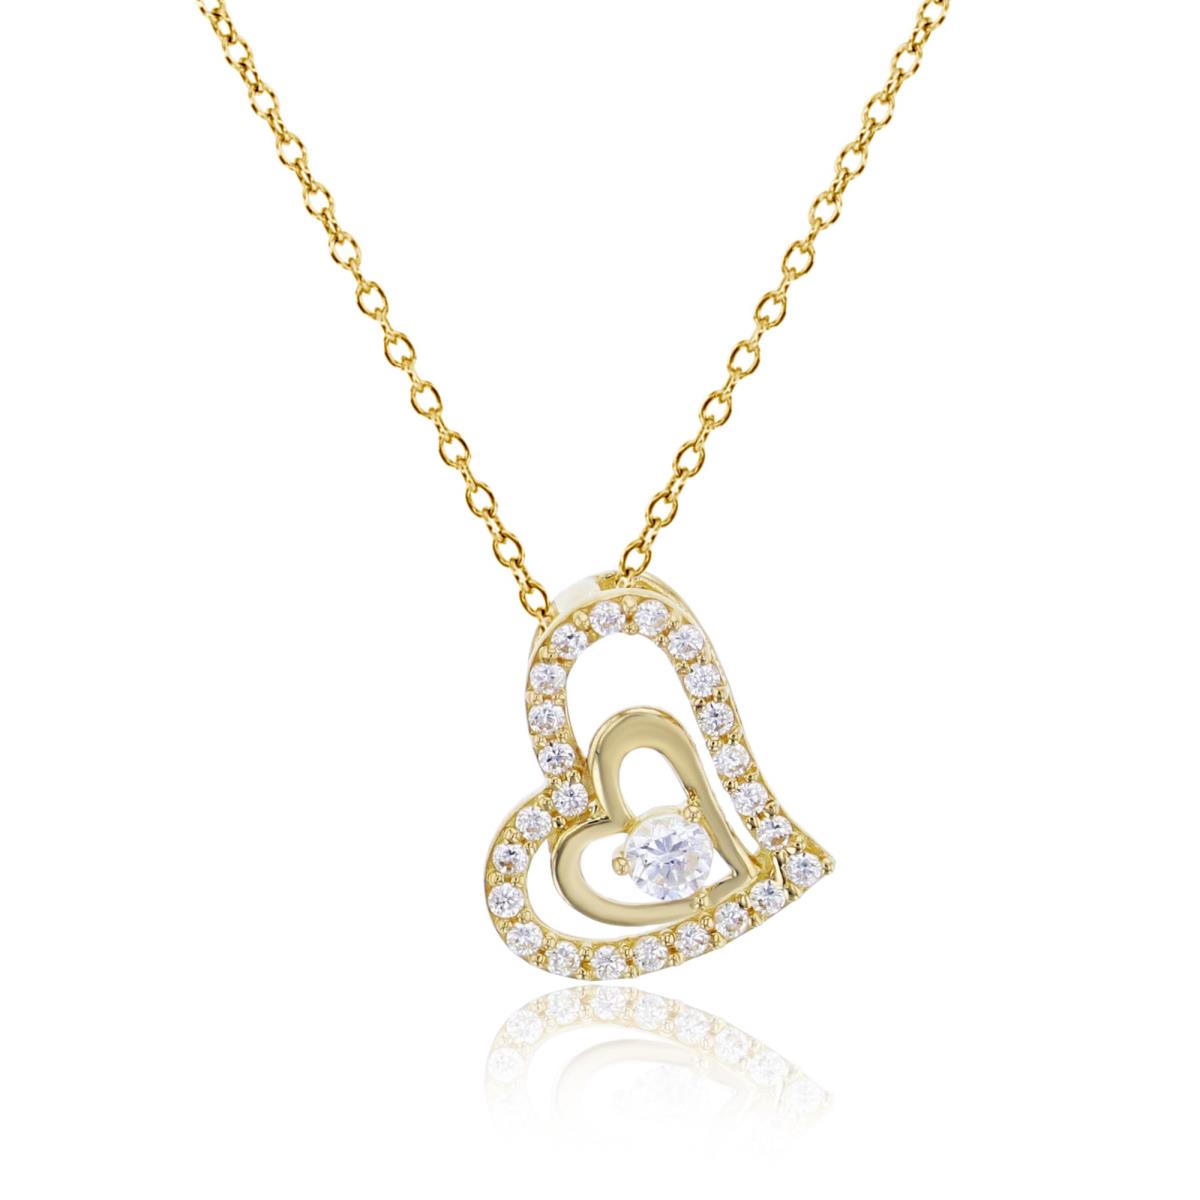 10K Yellow Gold 2.5mm Rd Cut CZ Inside Micropave & Polished Open Hearts 18" Necklace